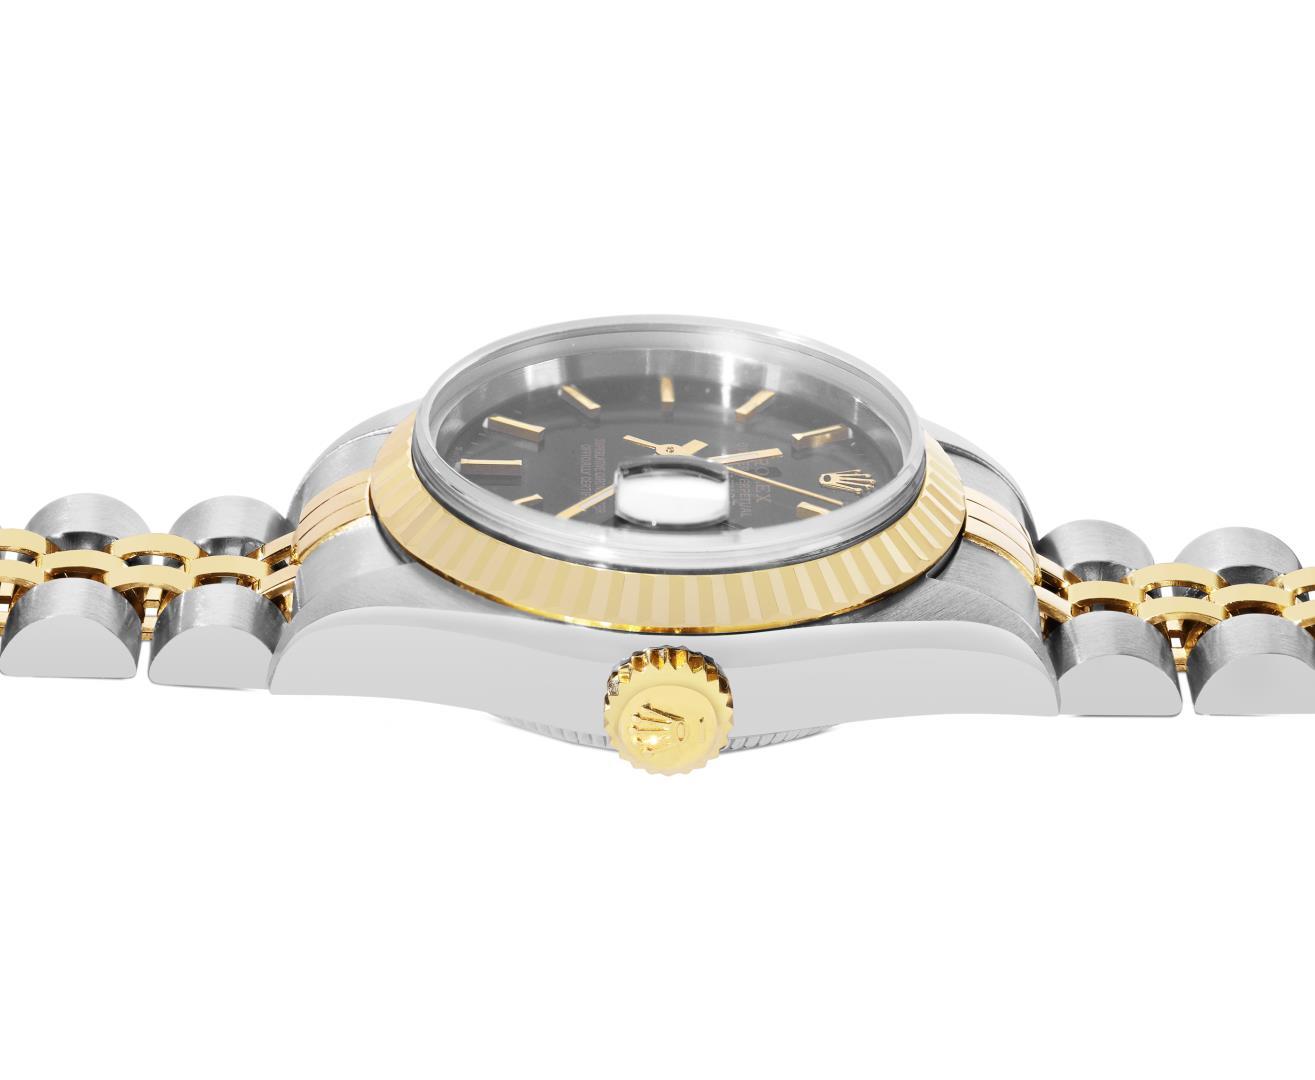 Rolex Ladies 18K Two Tone Gold And Steel Black Index 18K Yellow Gold Fluted Beze